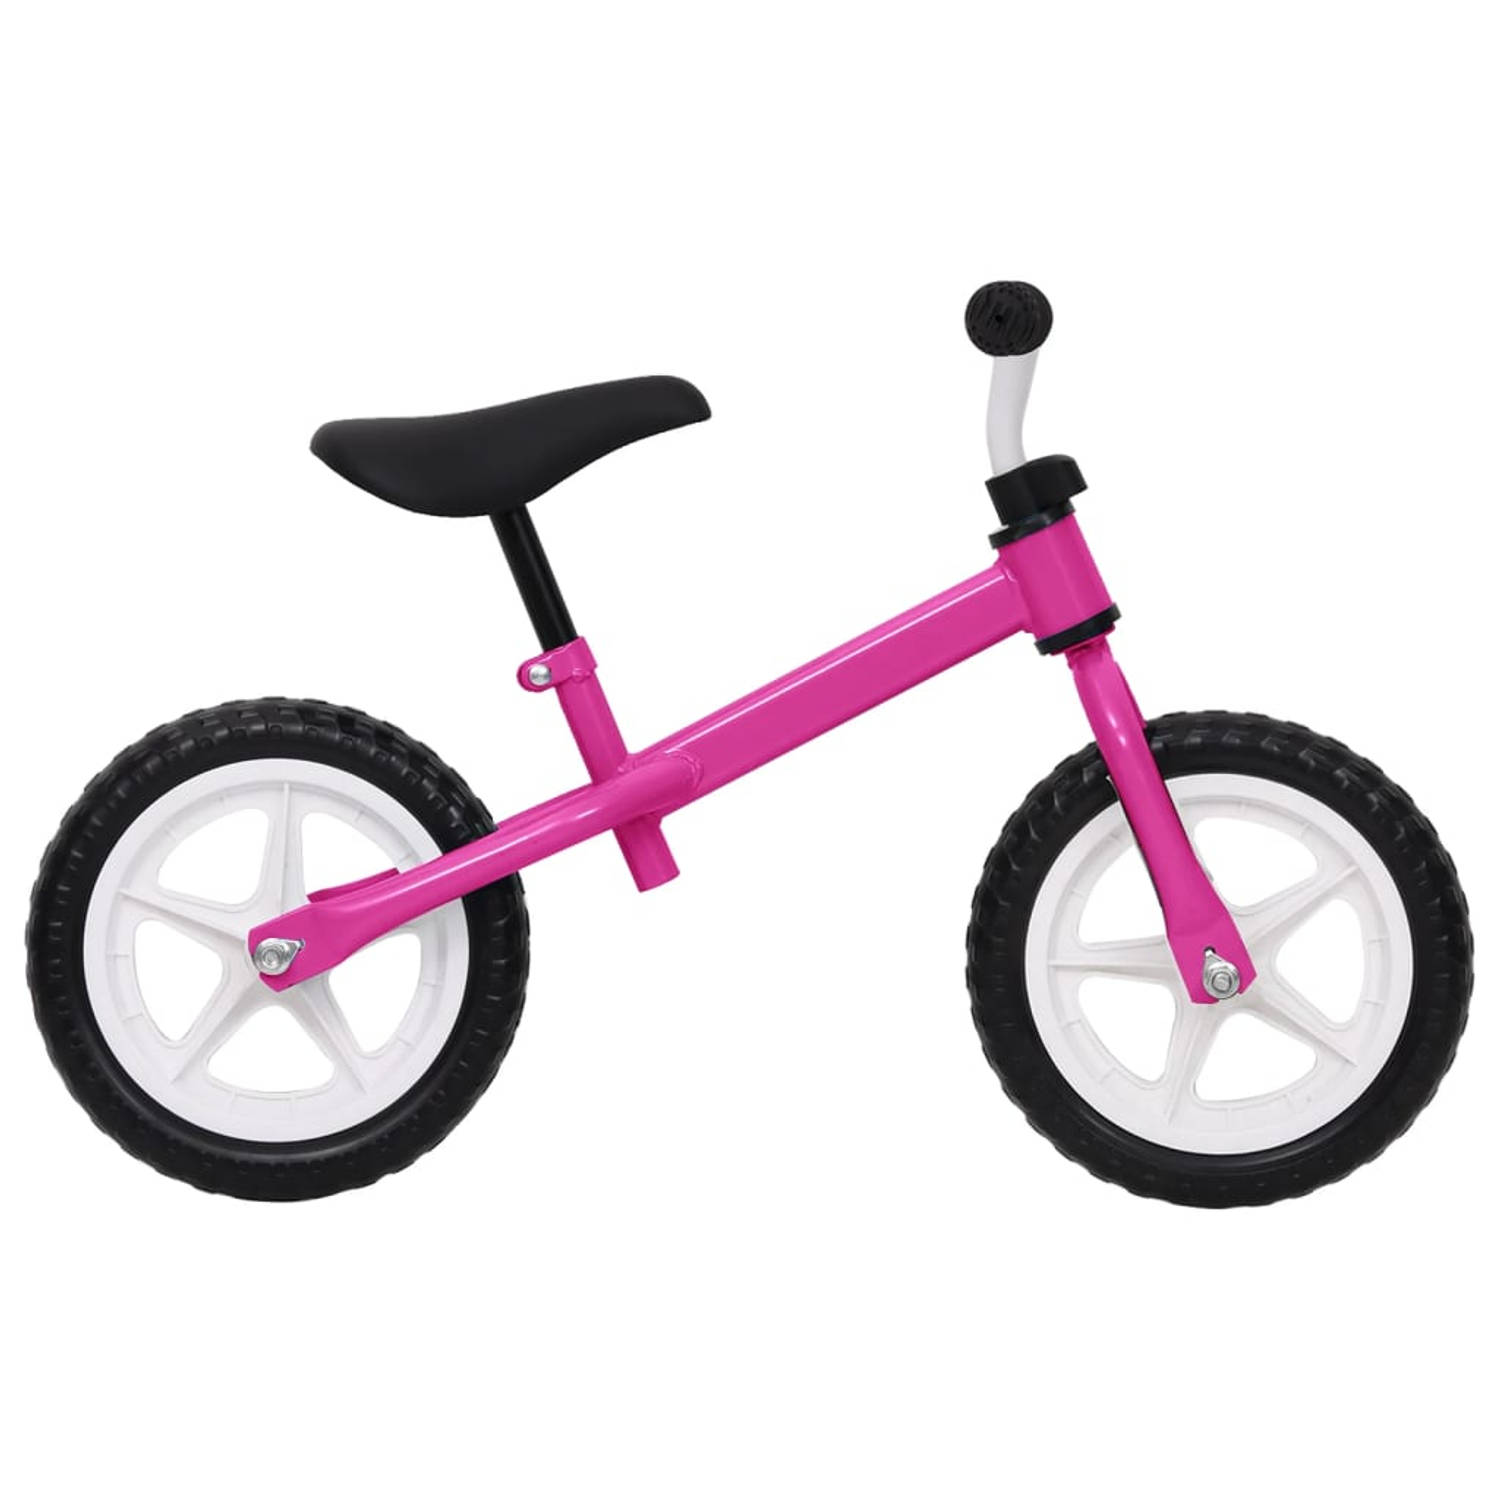 The Living Store Loopfiets 12 inch Roze